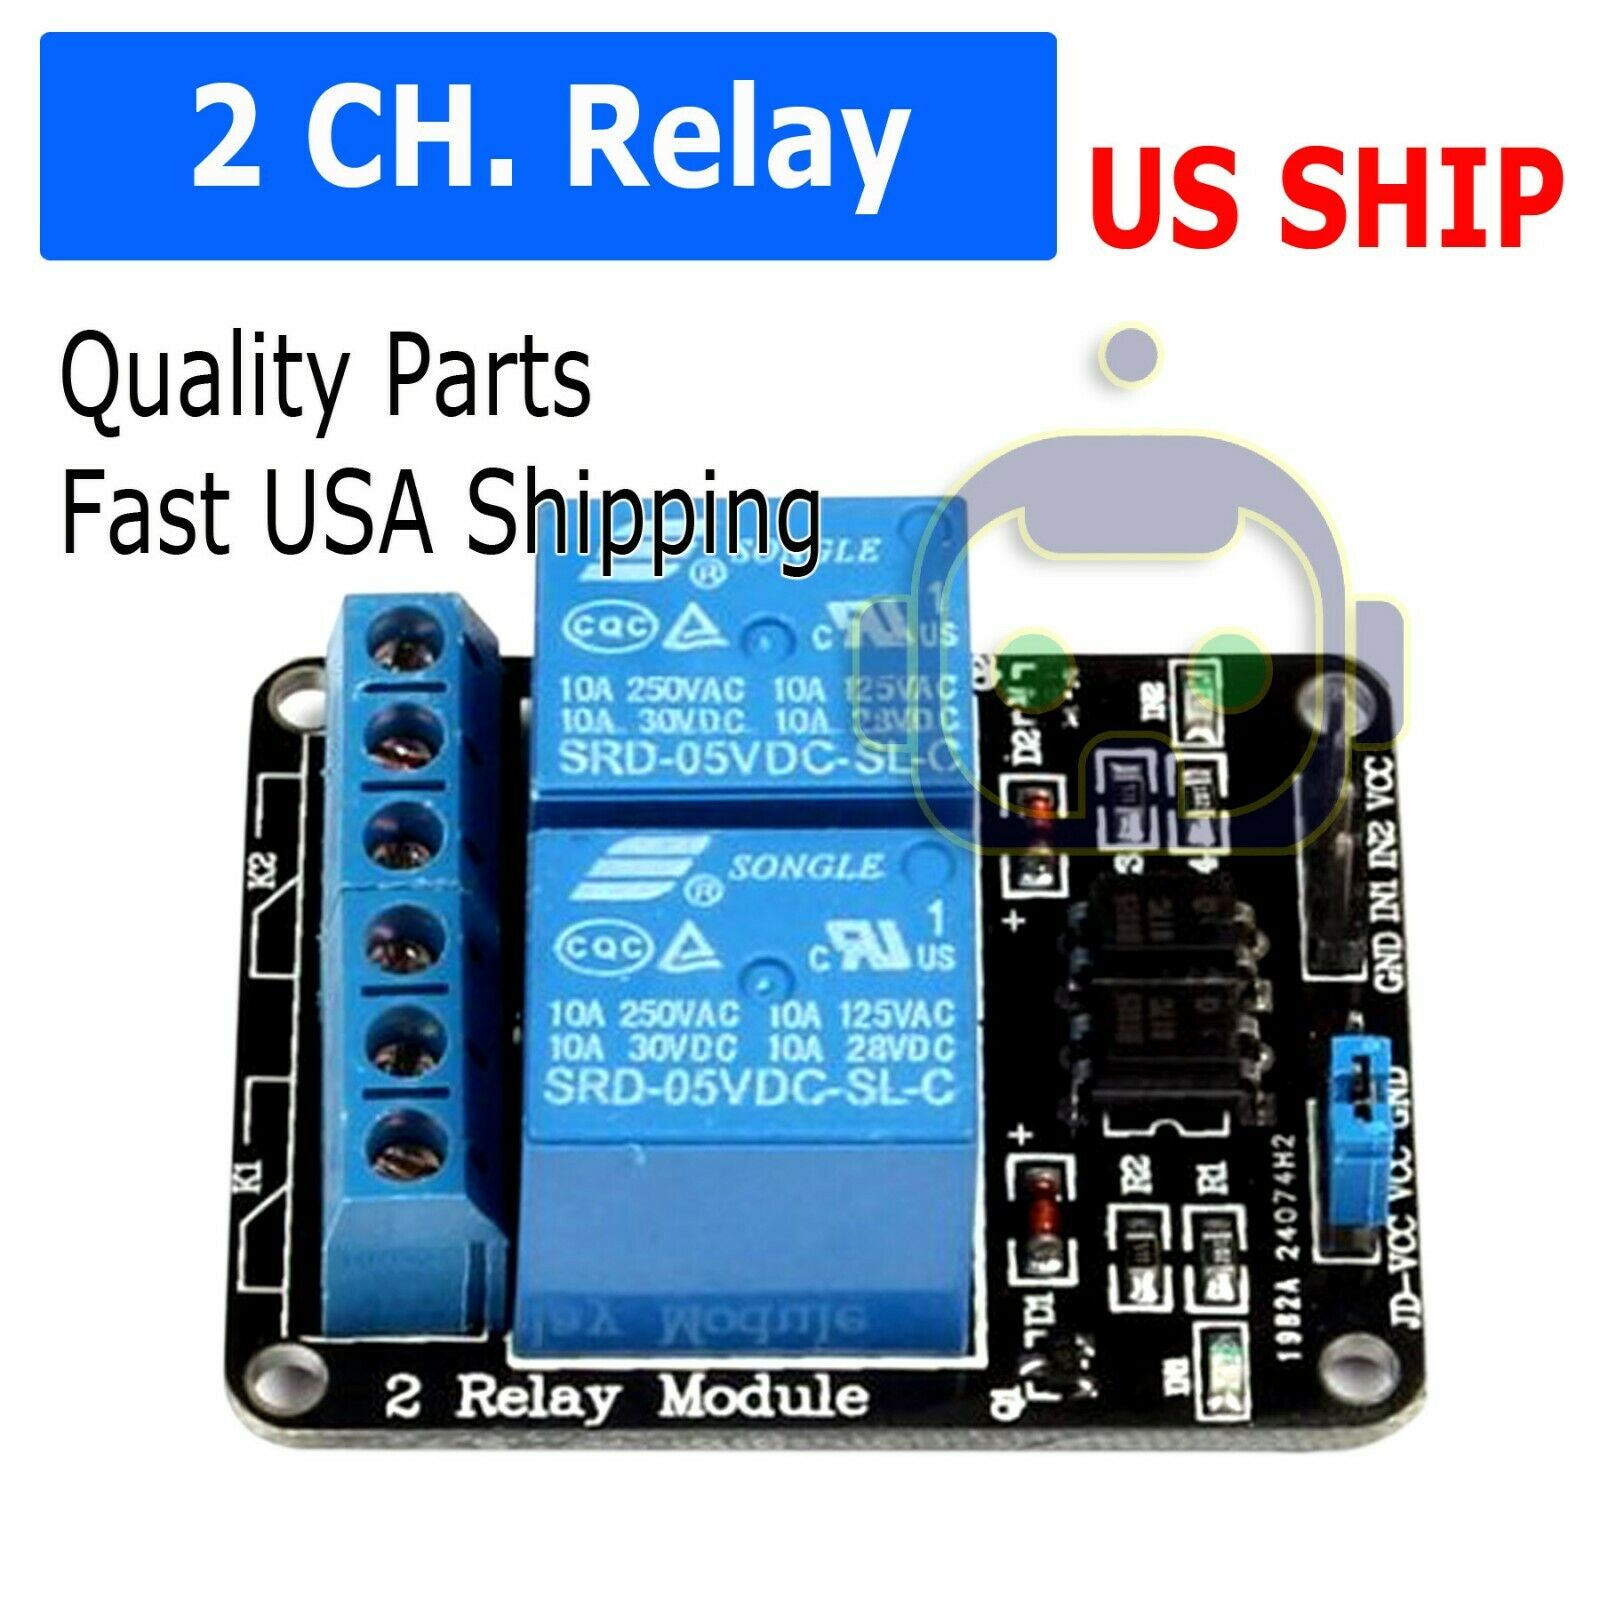 2 Channel Dc 5v Relay Switch Module For Arduino Raspberry Pi Arm Avr Dsp